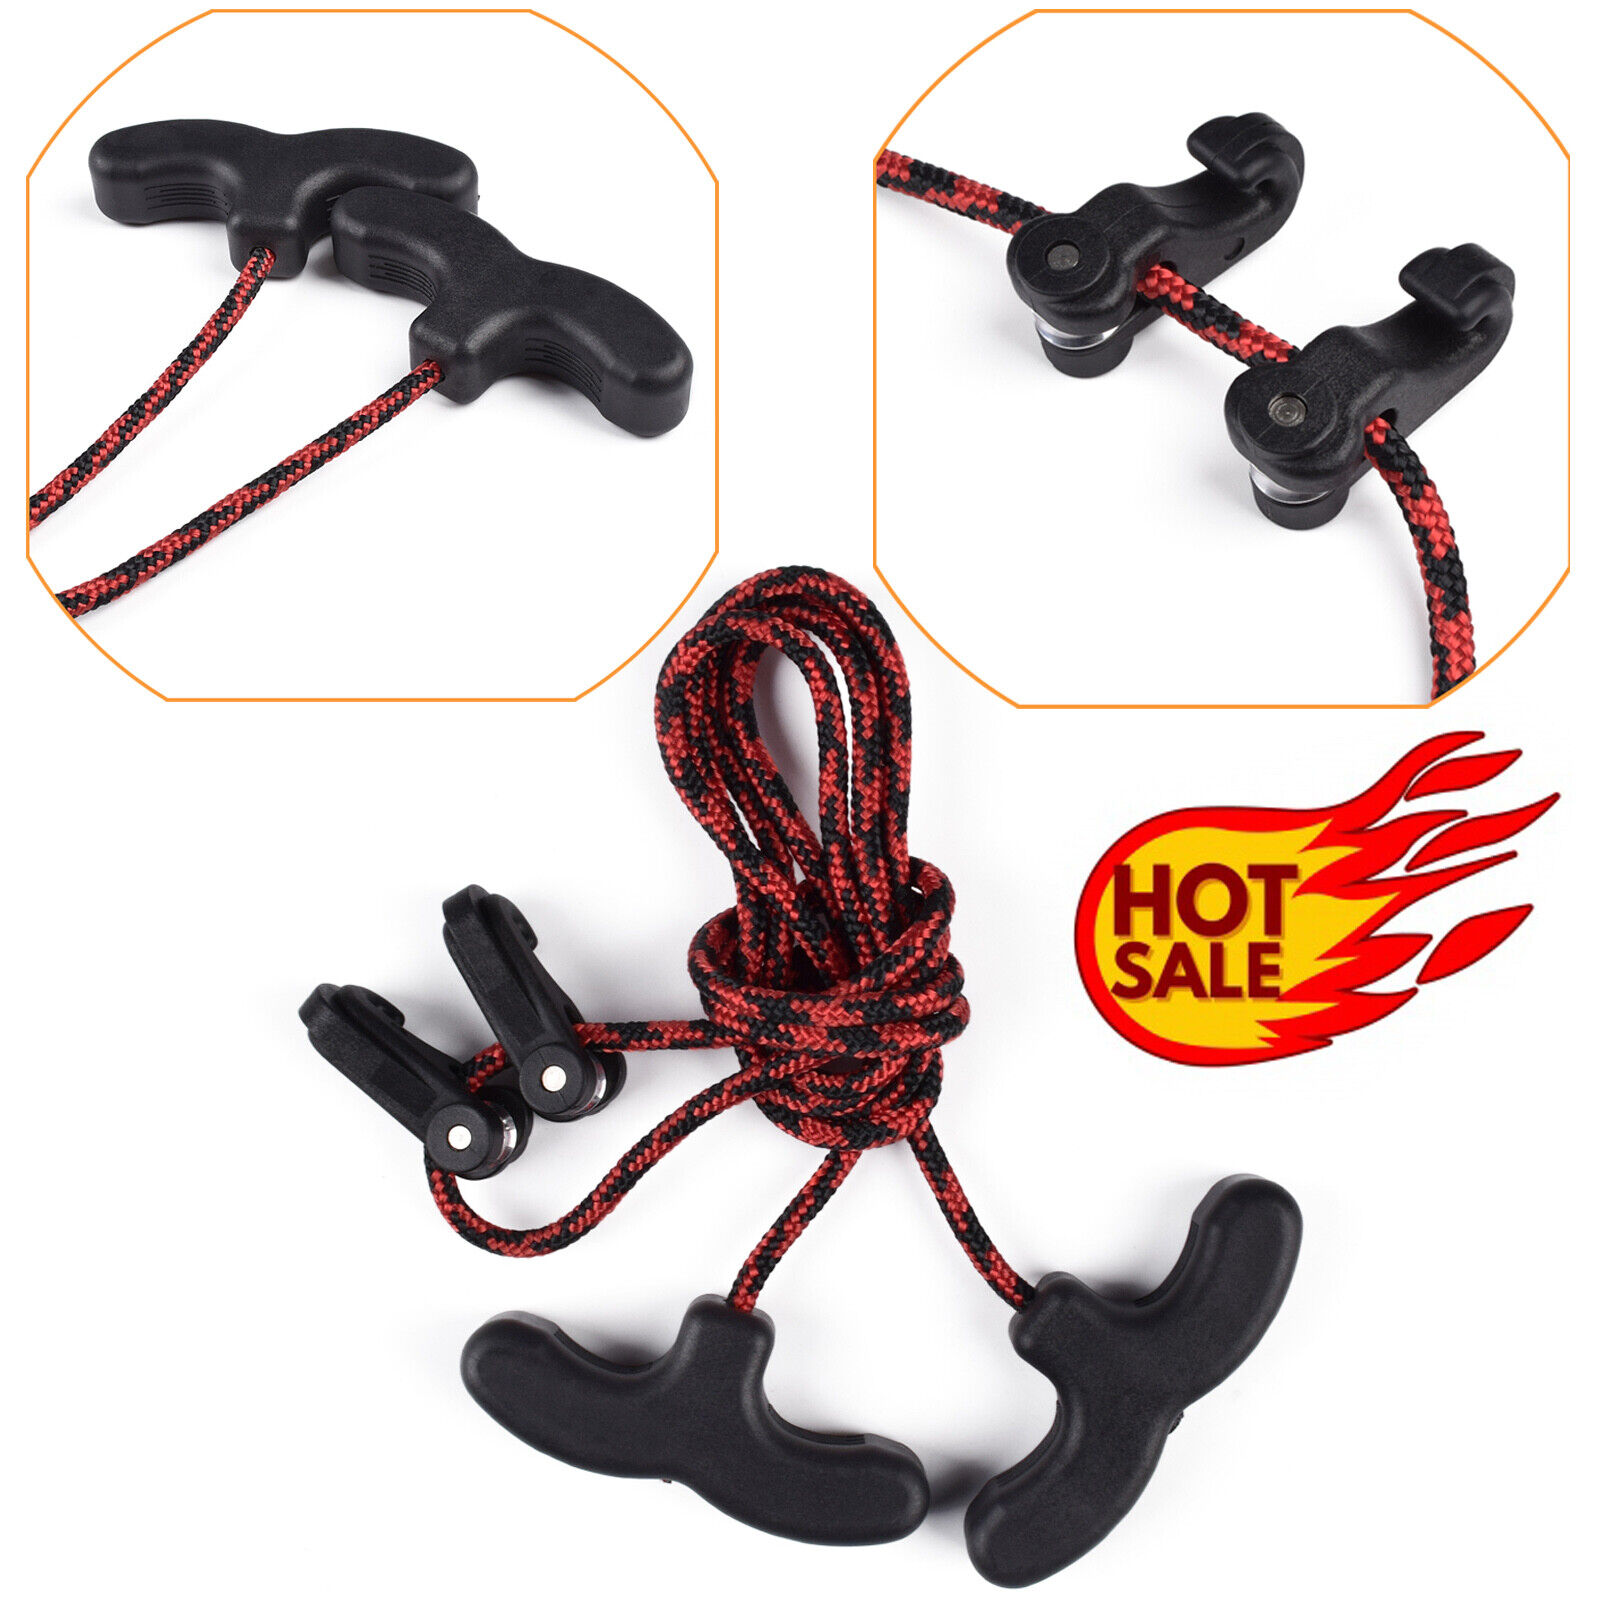 2pcs Cocker Rope Cocking Device Crossbow Target Hunting Archery Outdoor Practise outdoorhunter2020 Does Not Apply